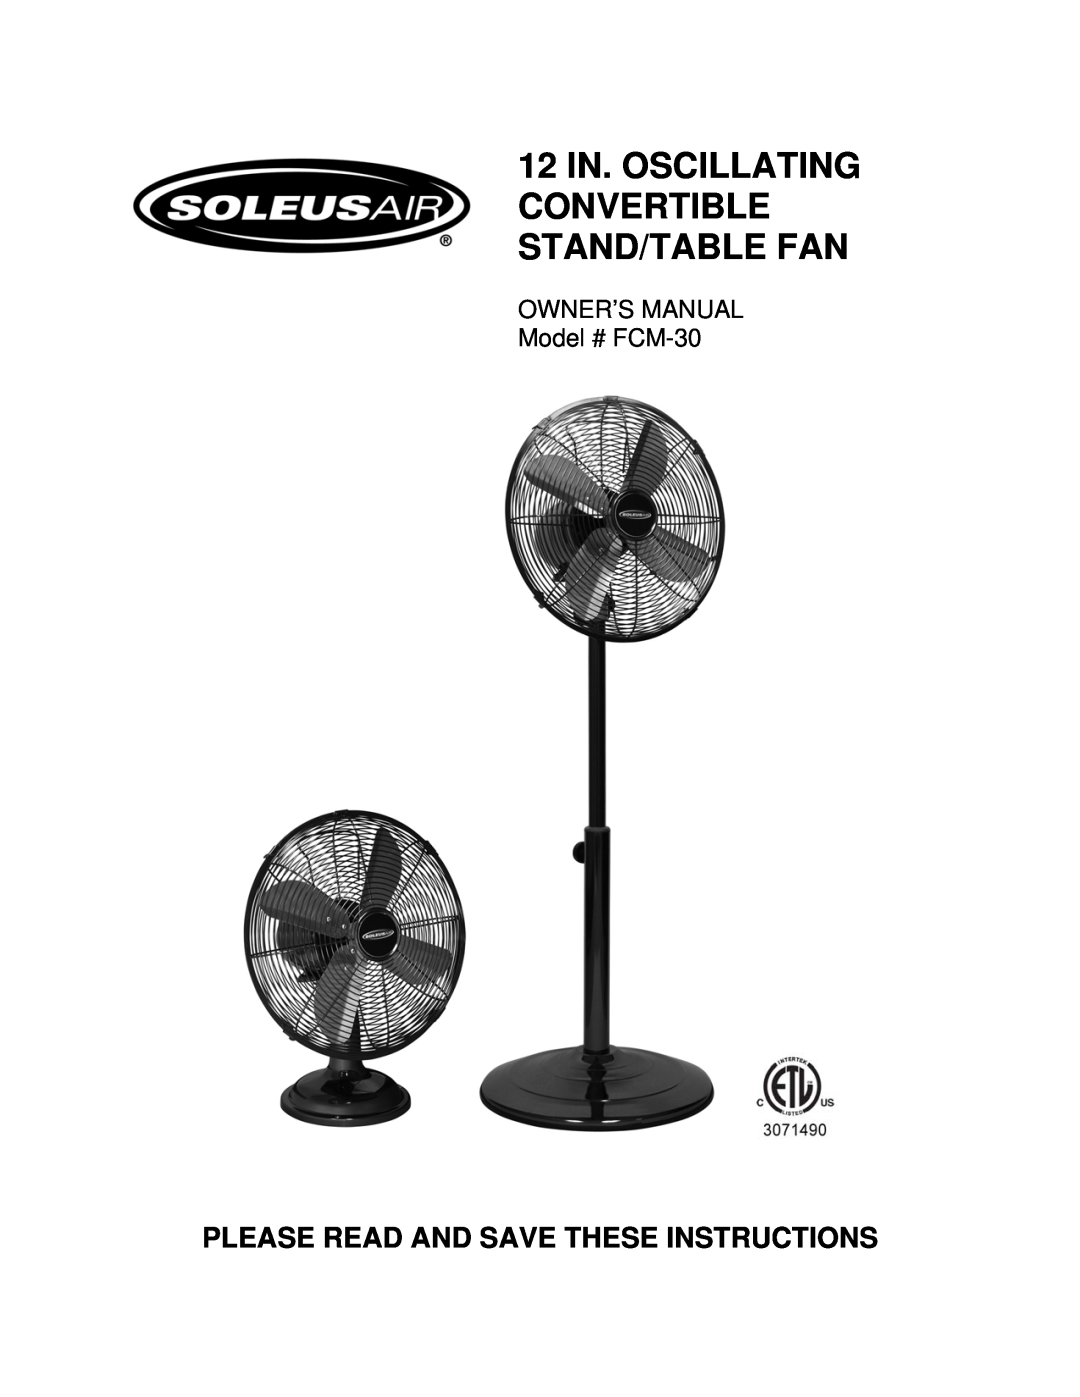 Soleus Air FCM-30 owner manual 12 IN. OSCILLATING CONVERTIBLE STAND/TABLE FAN, Please Read And Save These Instructions 